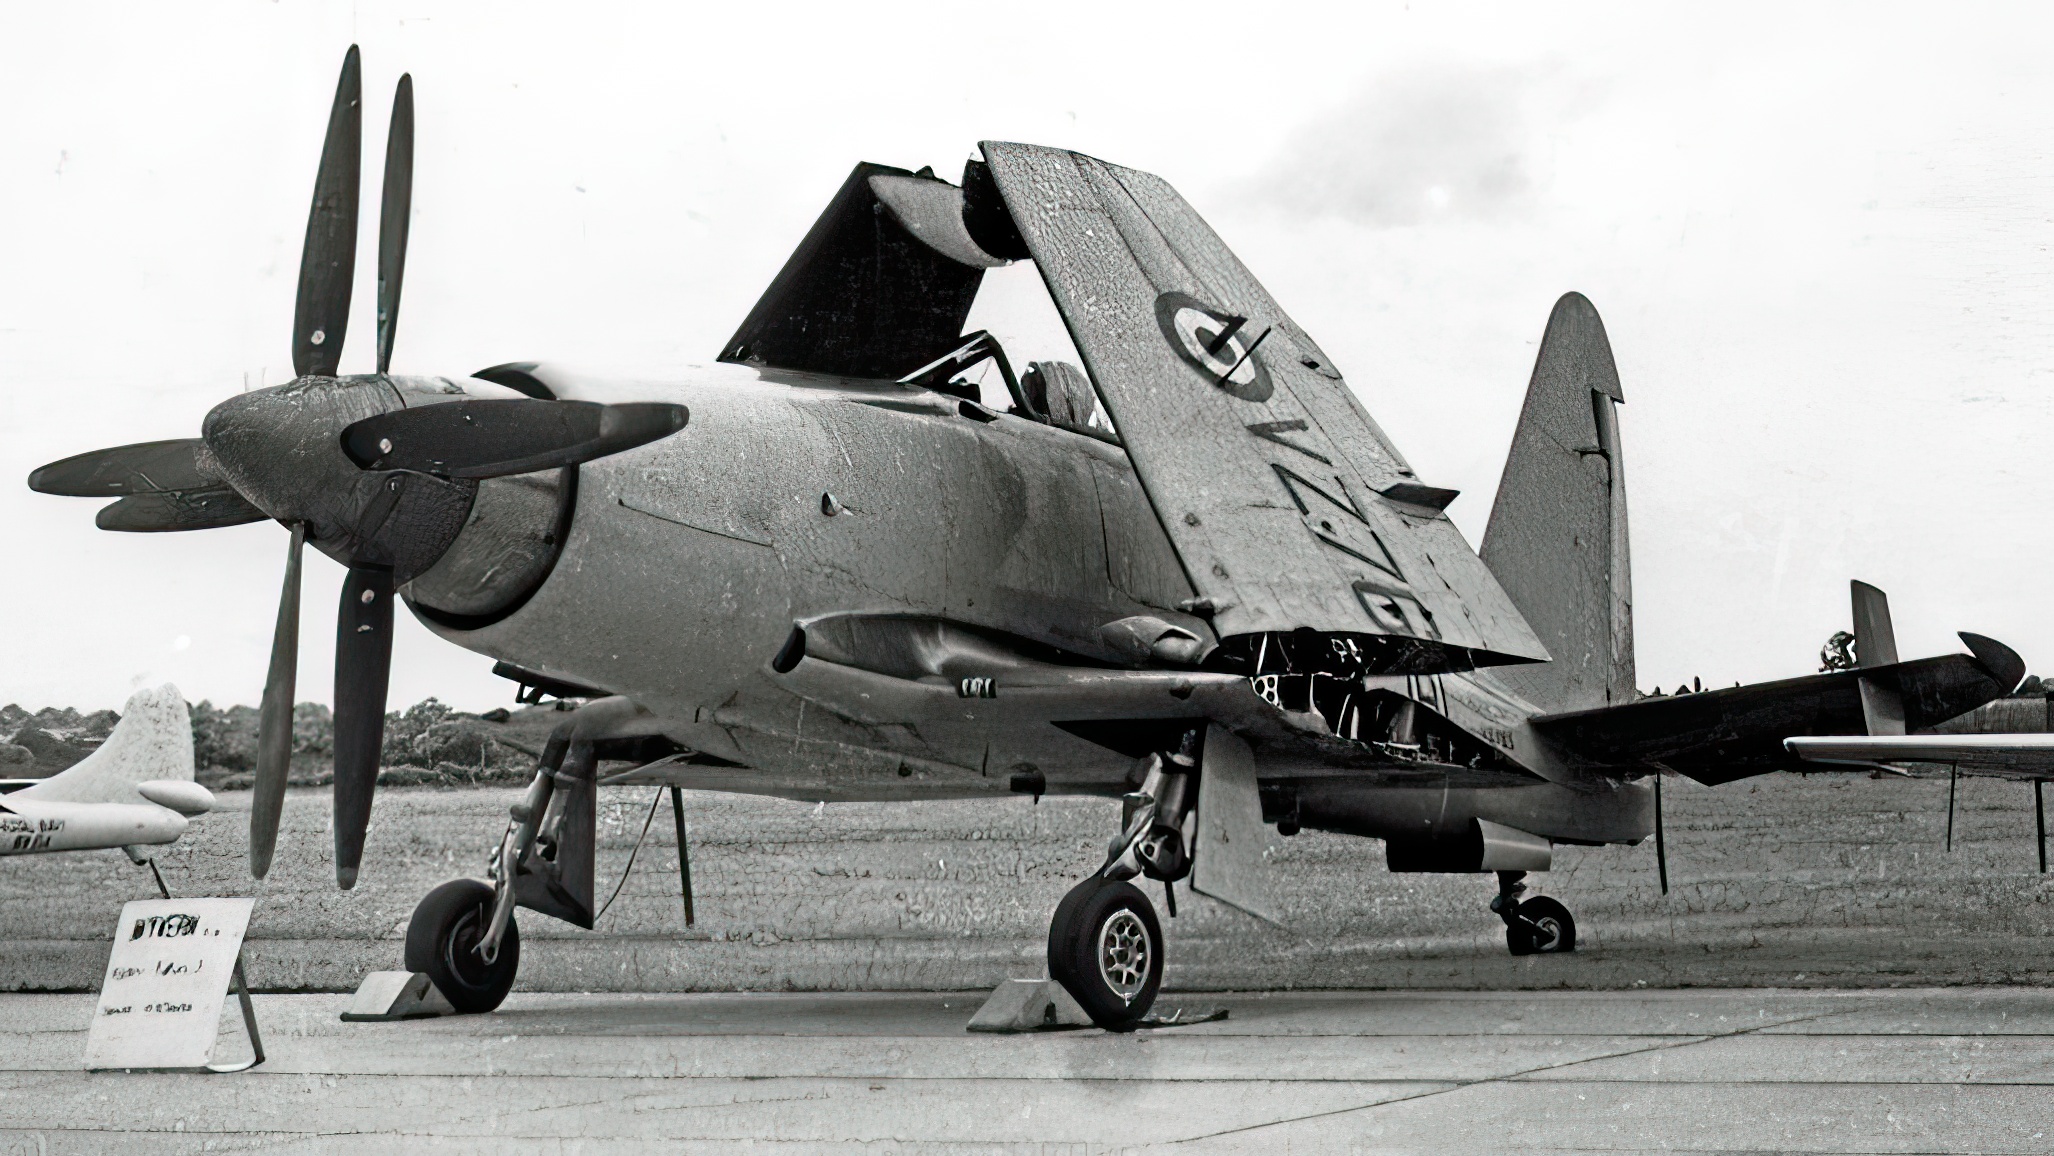 Westland Wyvern S.4 of 813 Naval Squadron at RNAS Stretton, Cheshire, in 1955